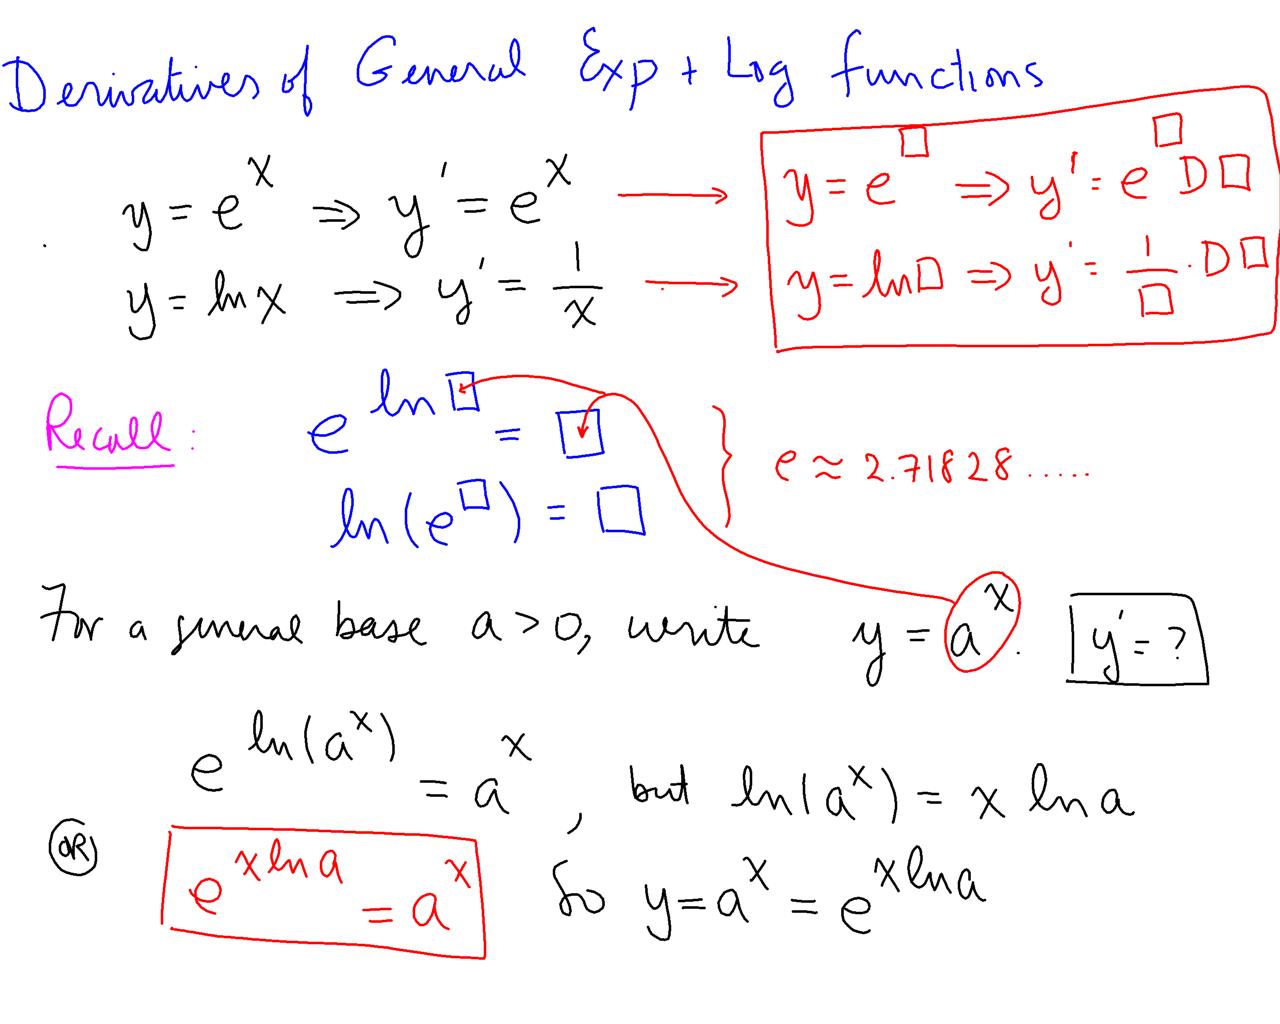 derivatives-of-general-exponential-and-logarithmic-functions